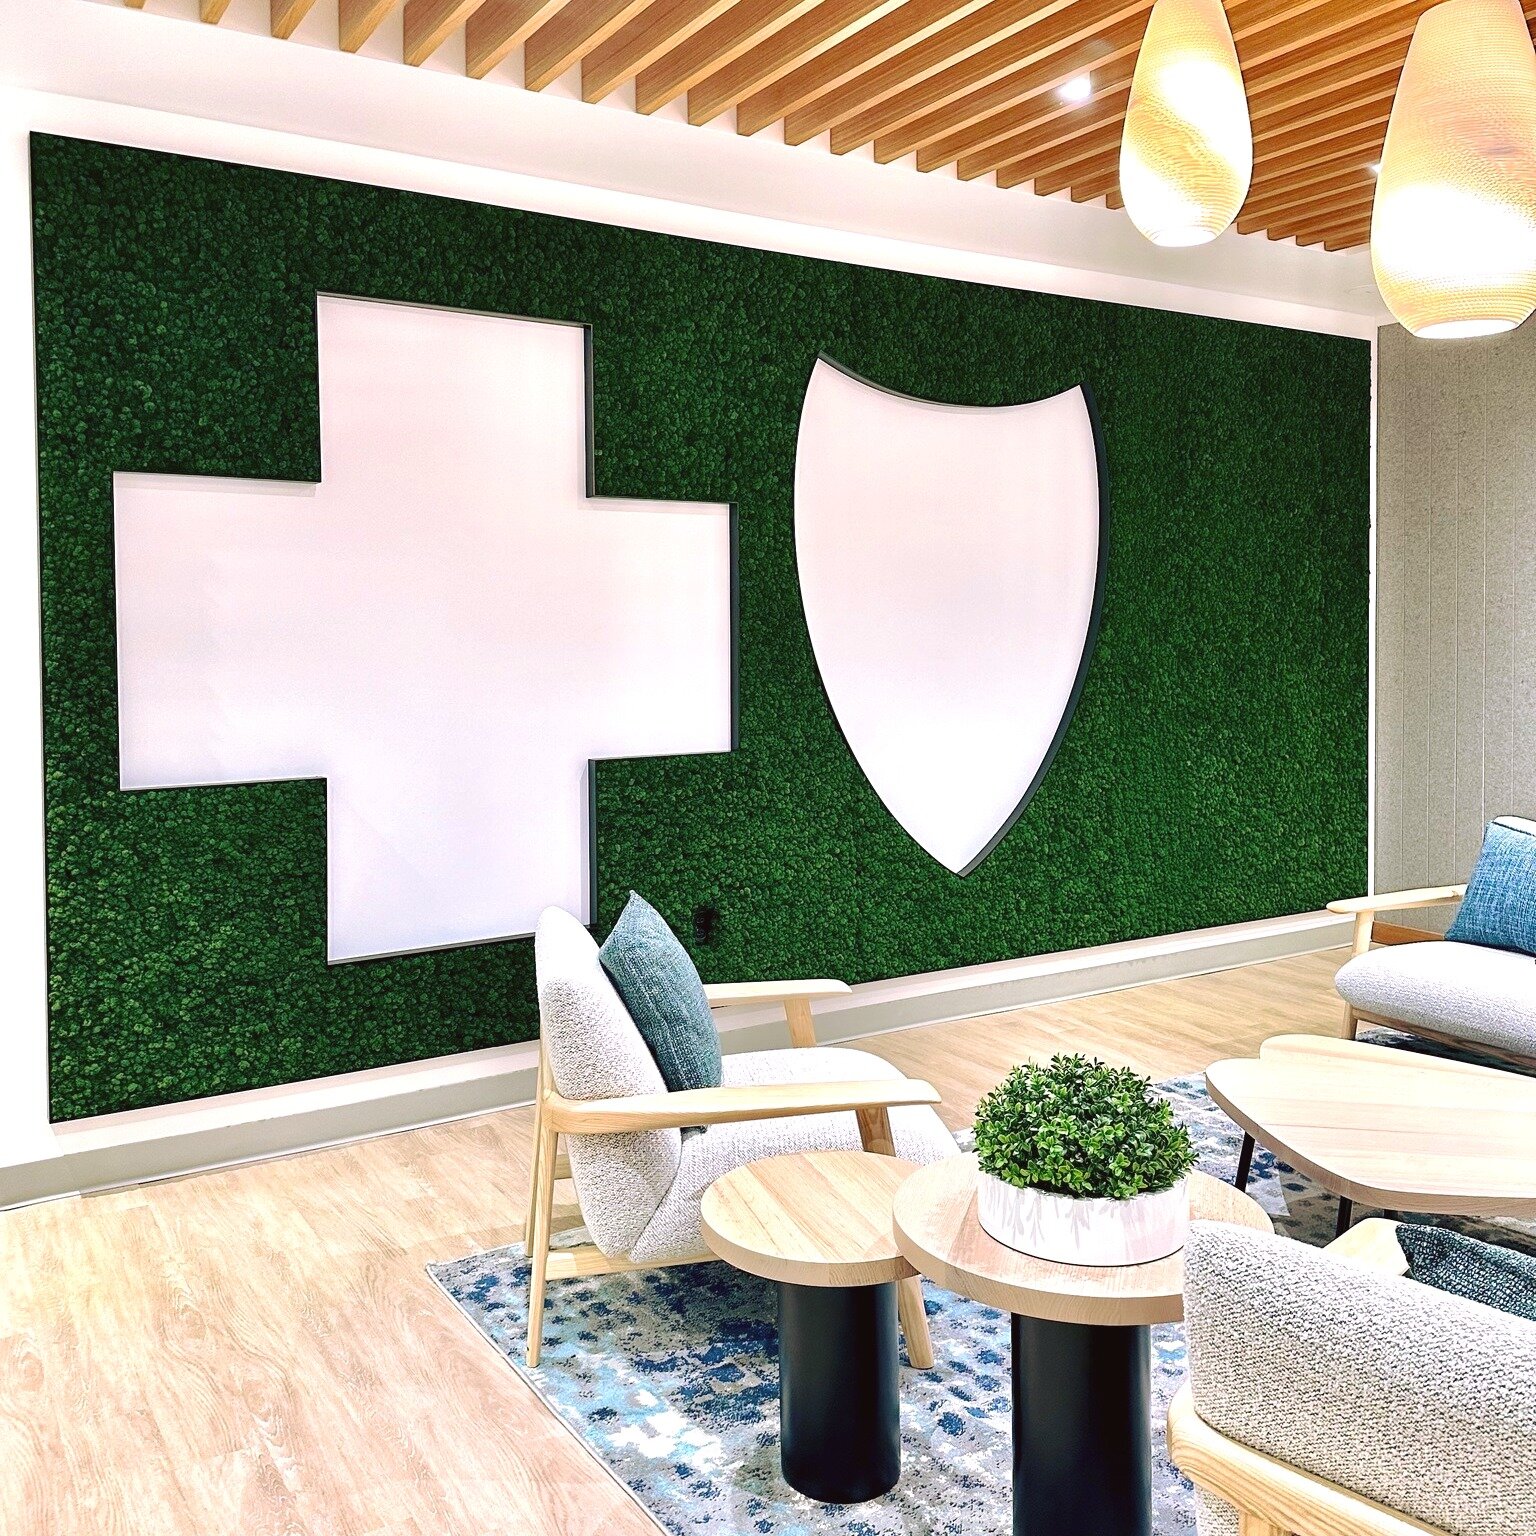 Sometimes, using a single moss type can be the perfect solution to bring nature indoors while also creating a timeless piece. Created for Anthem Blue Cross Blue Shield, this lounge area is the perfect balance of modern meets nature. 

#moss #reindeer